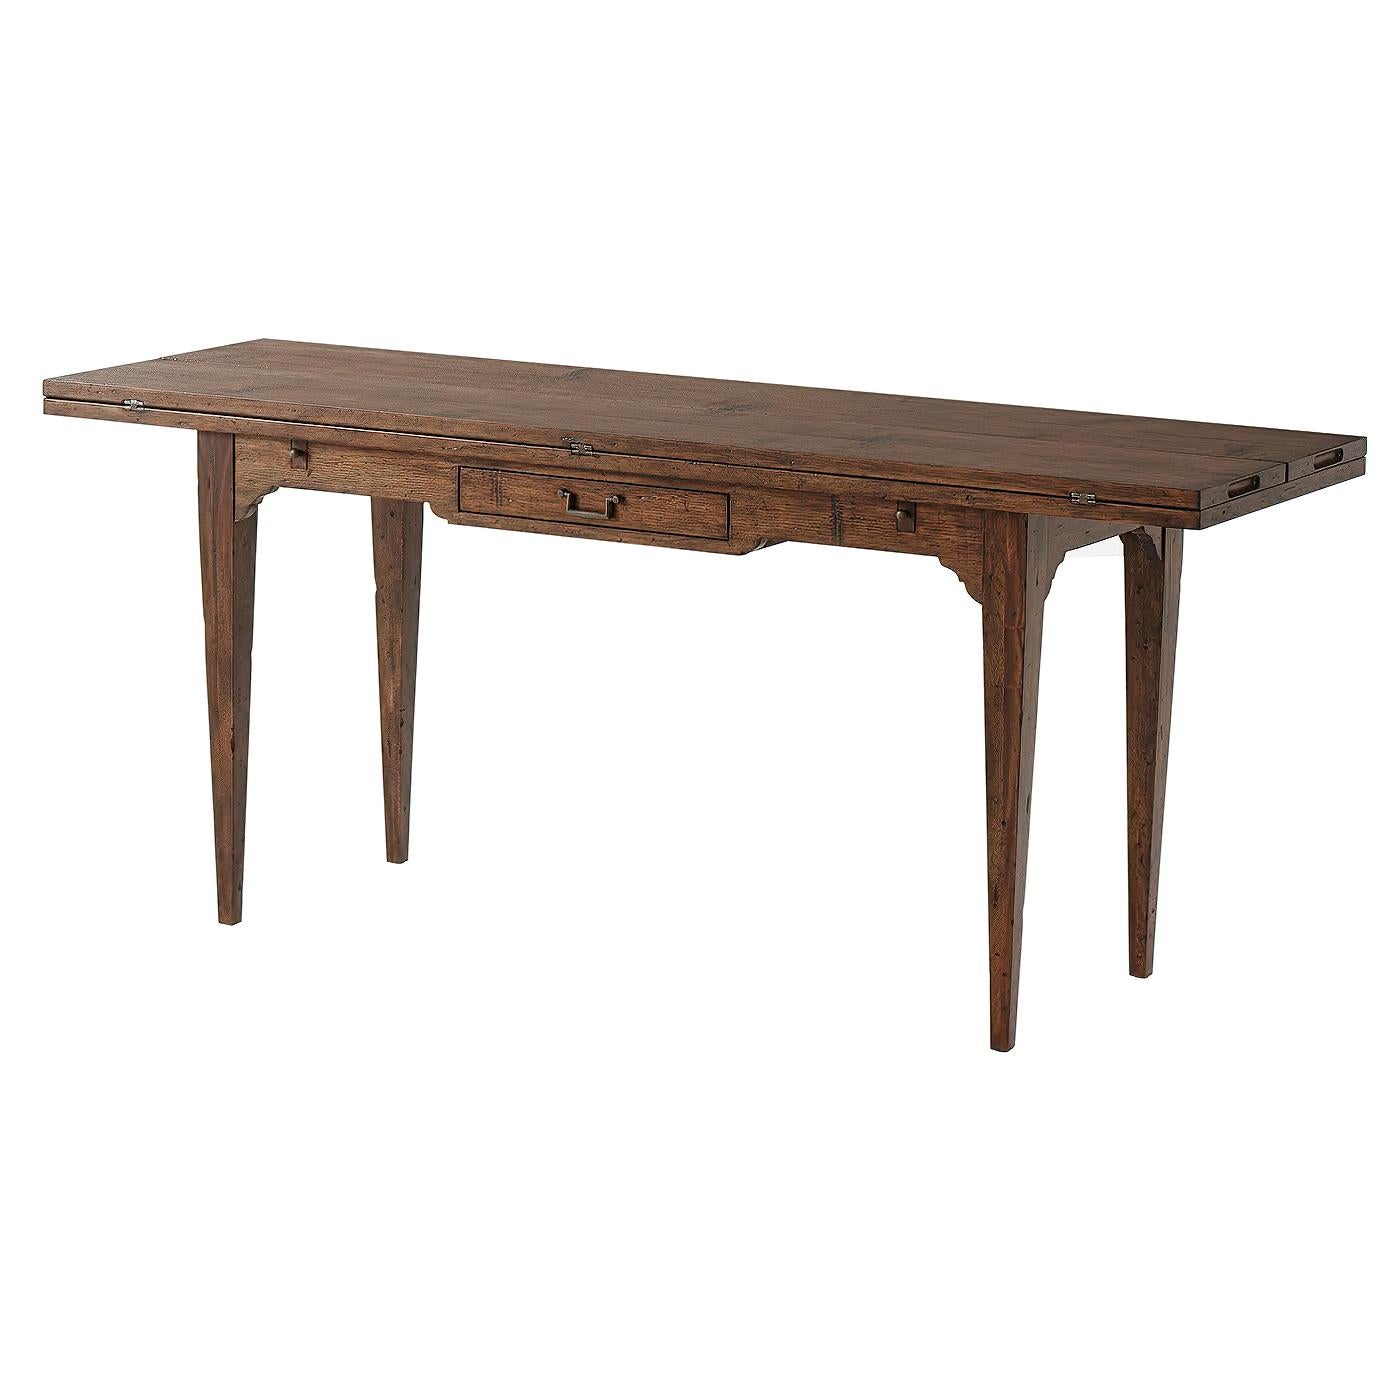 A convertible fold over console / dining table. With a frieze drawer, of mahogany and hickory veneers in an aged hickory finish on square tapering legs.
Dimensions:
Open 72